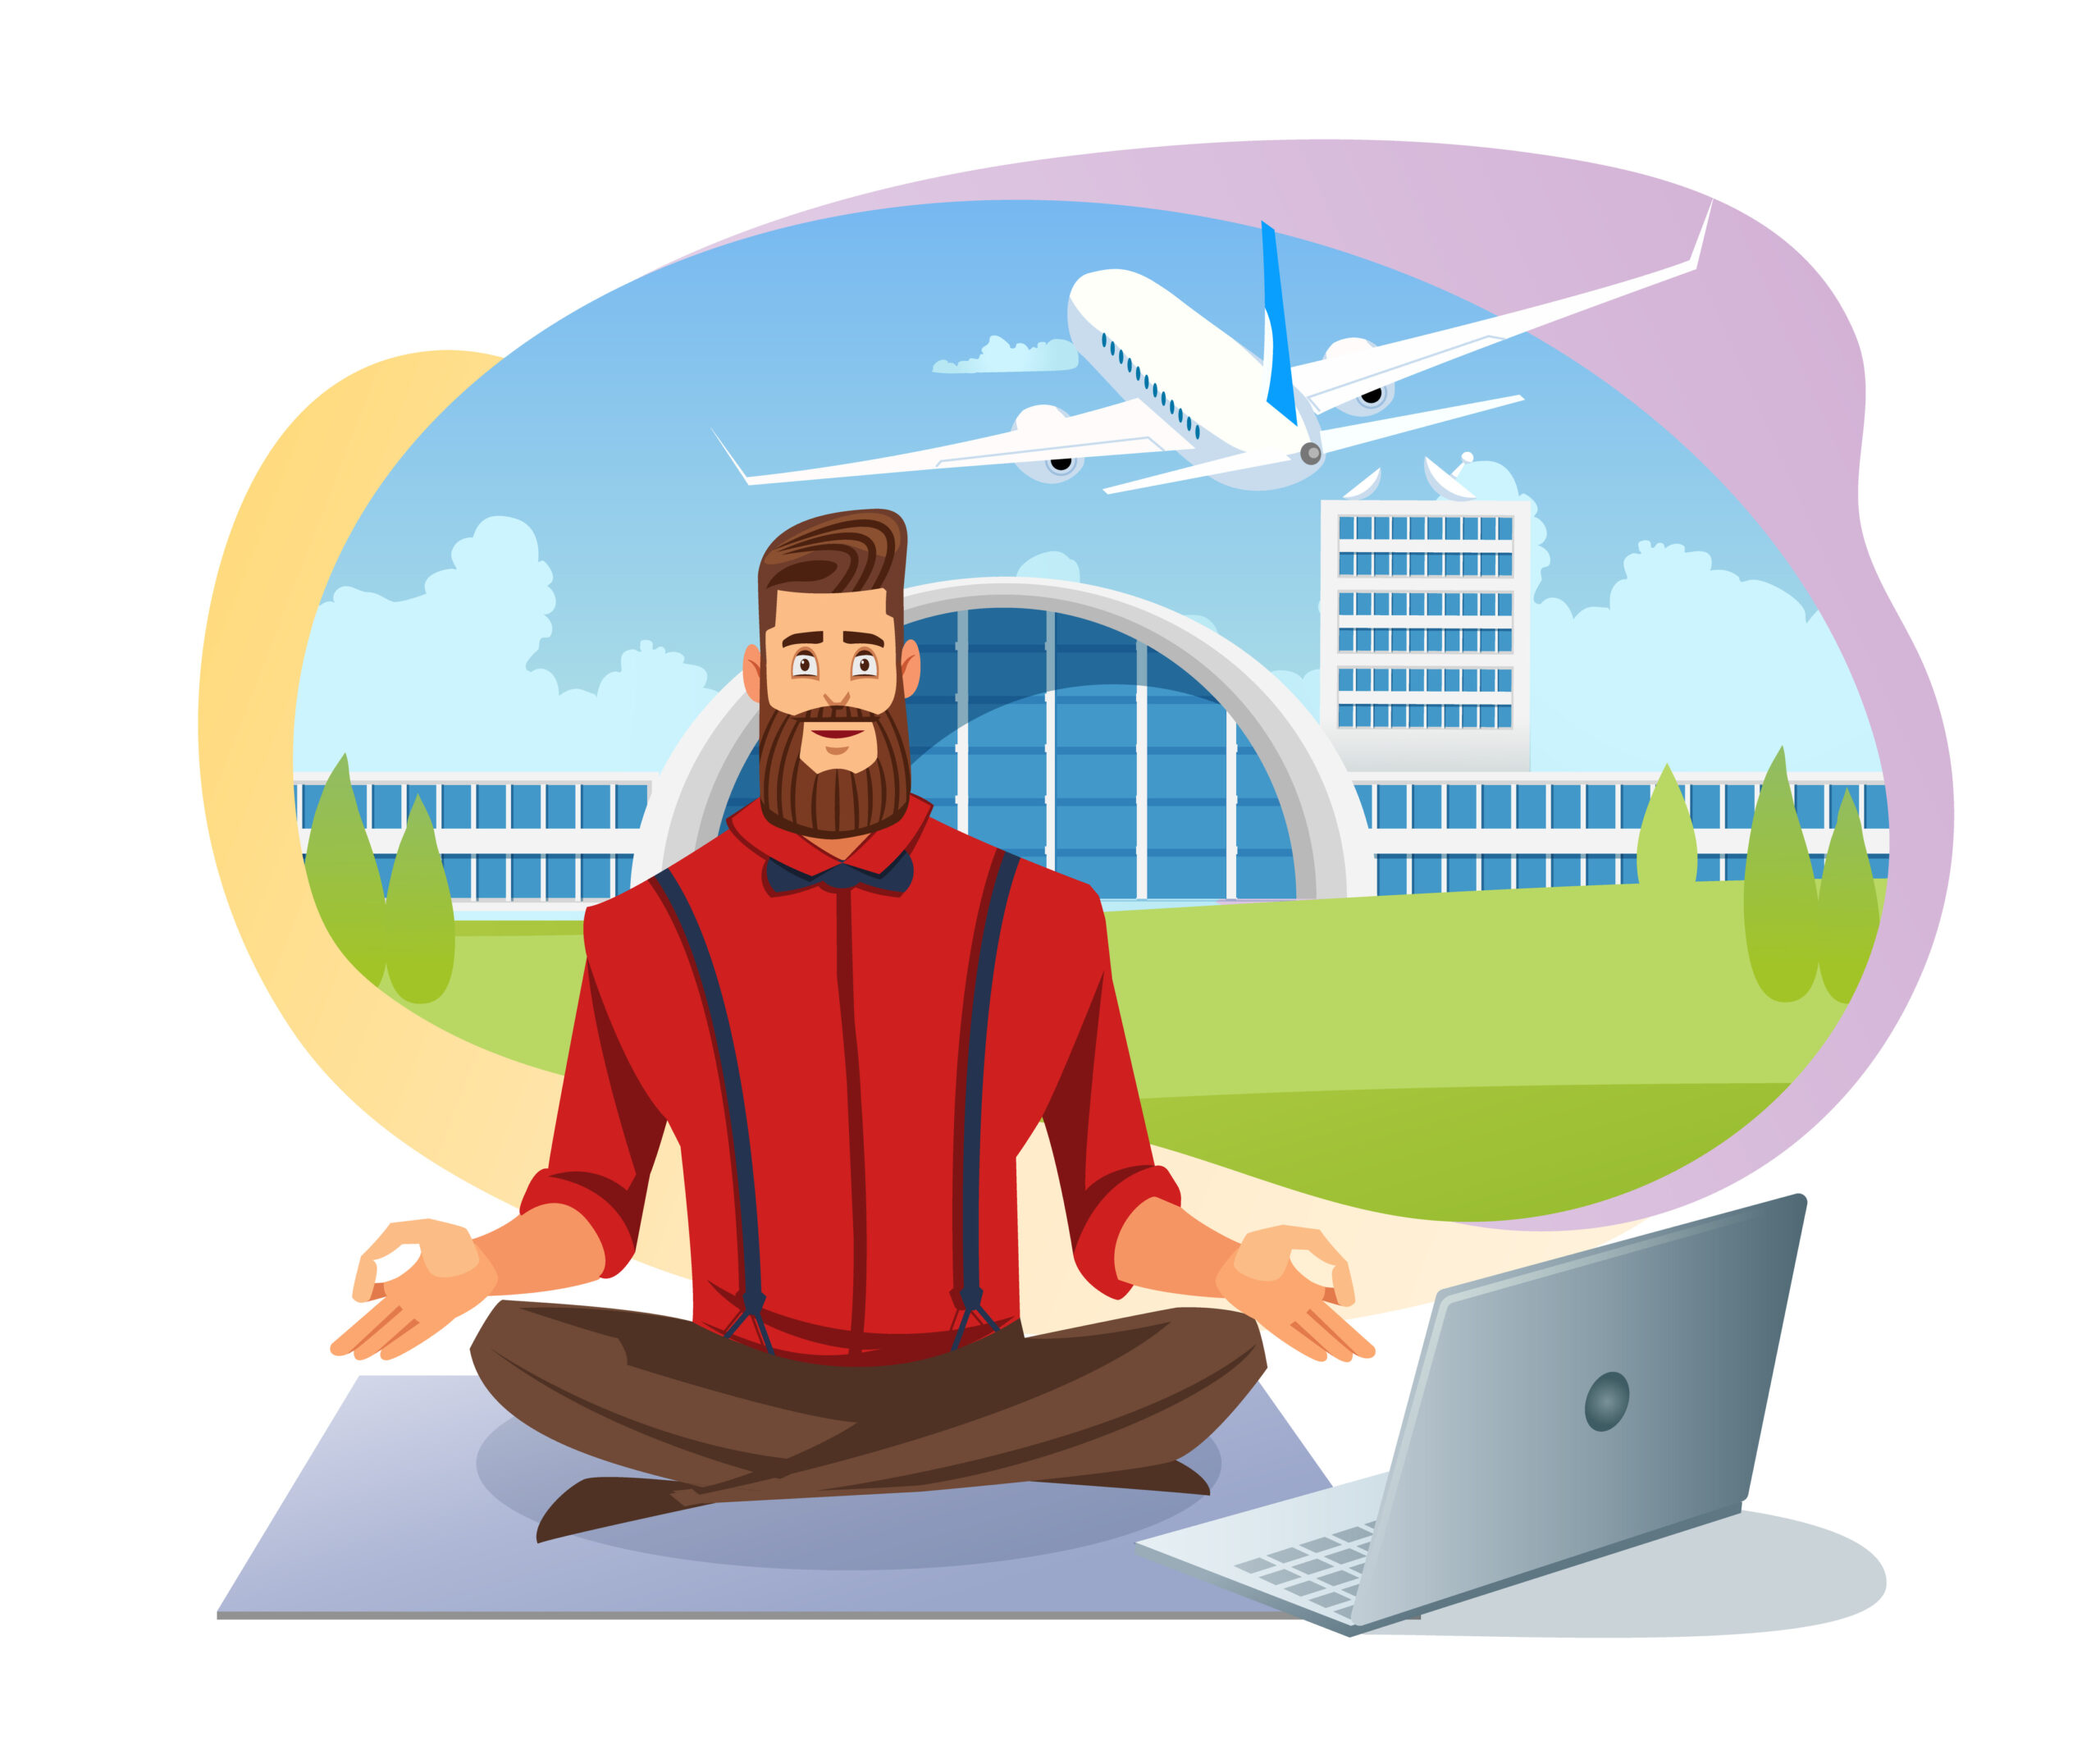 Man at peace with a laptop and plane in the back